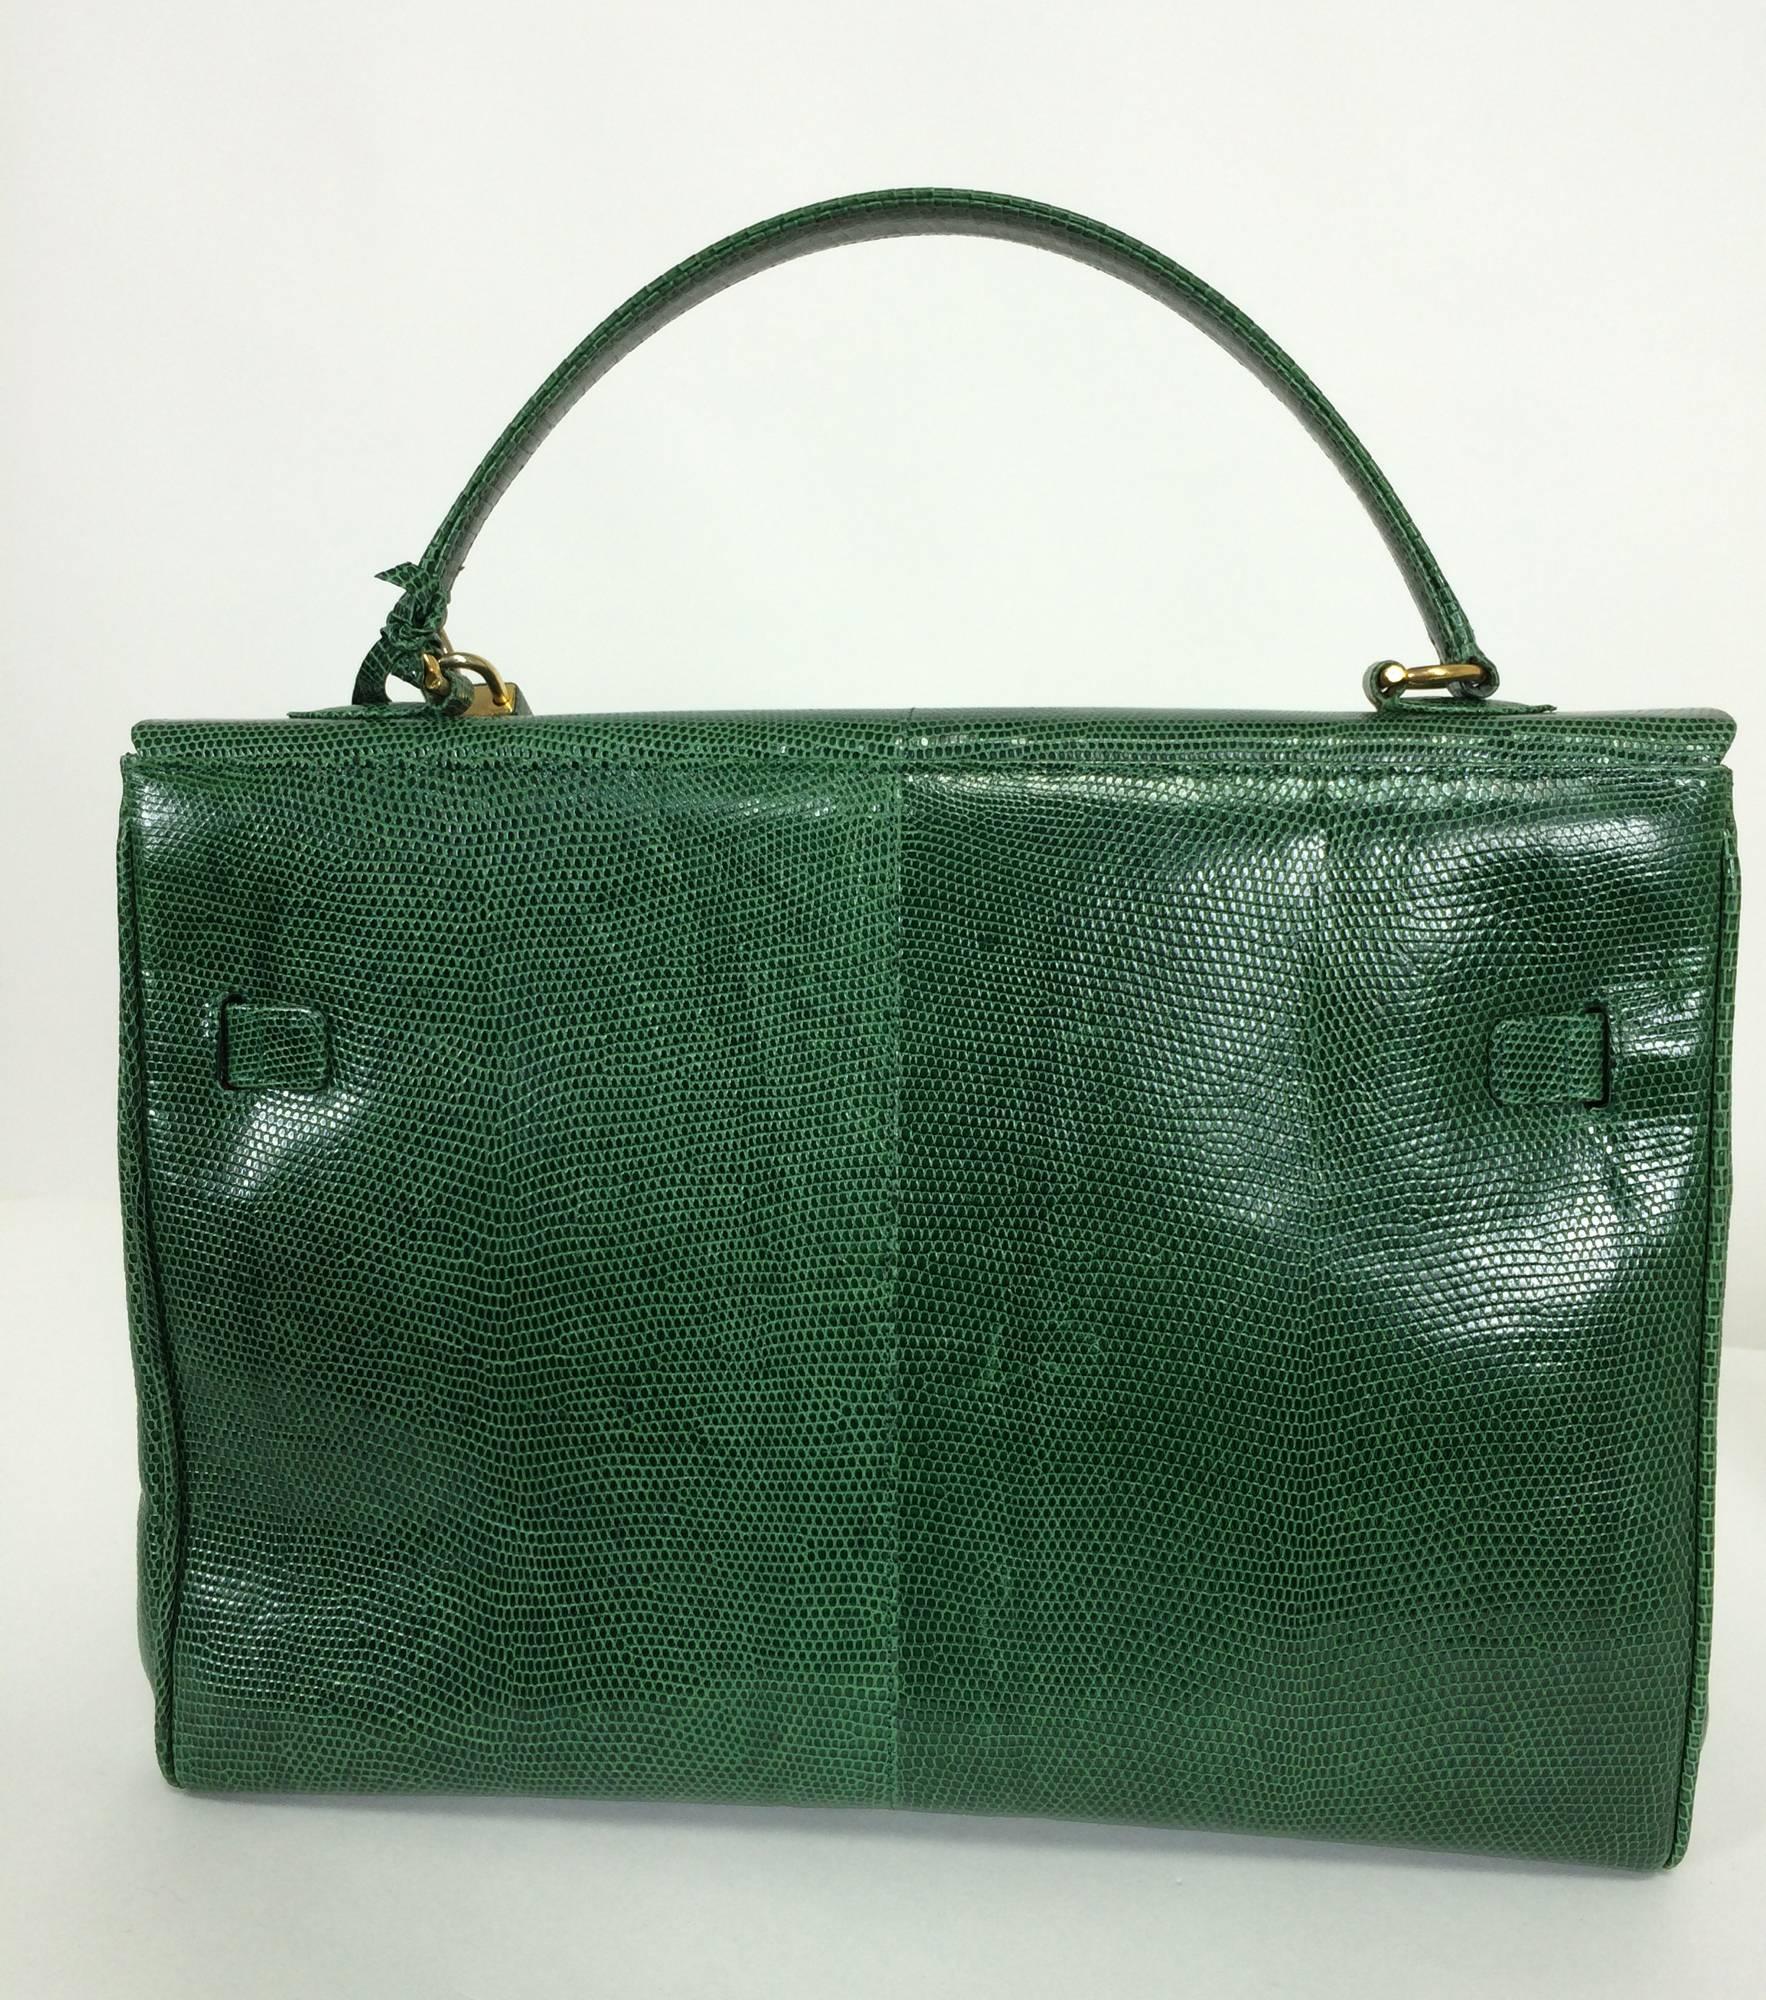 Luc Benoit green glazed lizard Kelly style handbag gold hardware 1990s...A gorgeous shade of green between kelly and forest...In the 1980s & 90s Luc Benoit was famous for using exotic skins for his lux bags...Beautifully constructed with beautiful